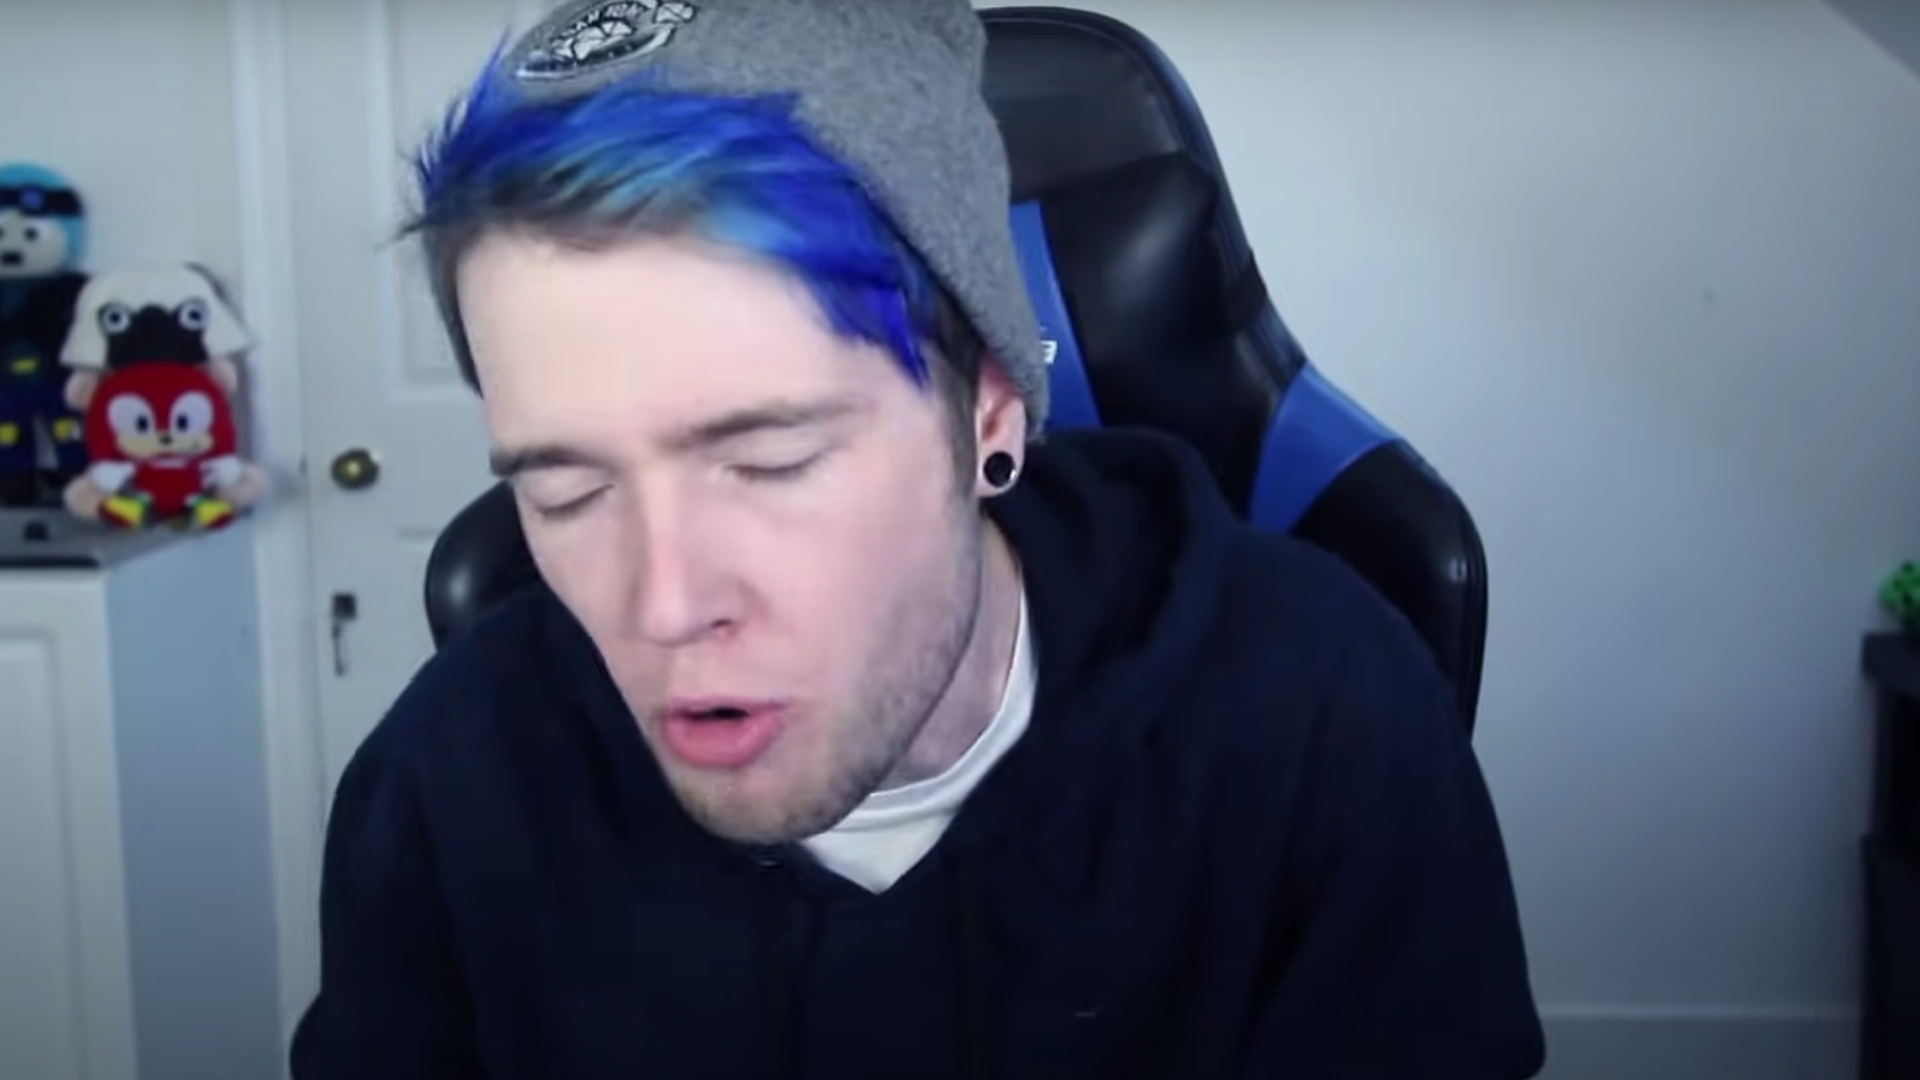 2. How to Achieve Dantdm's Iconic Blue Hair Look - wide 6